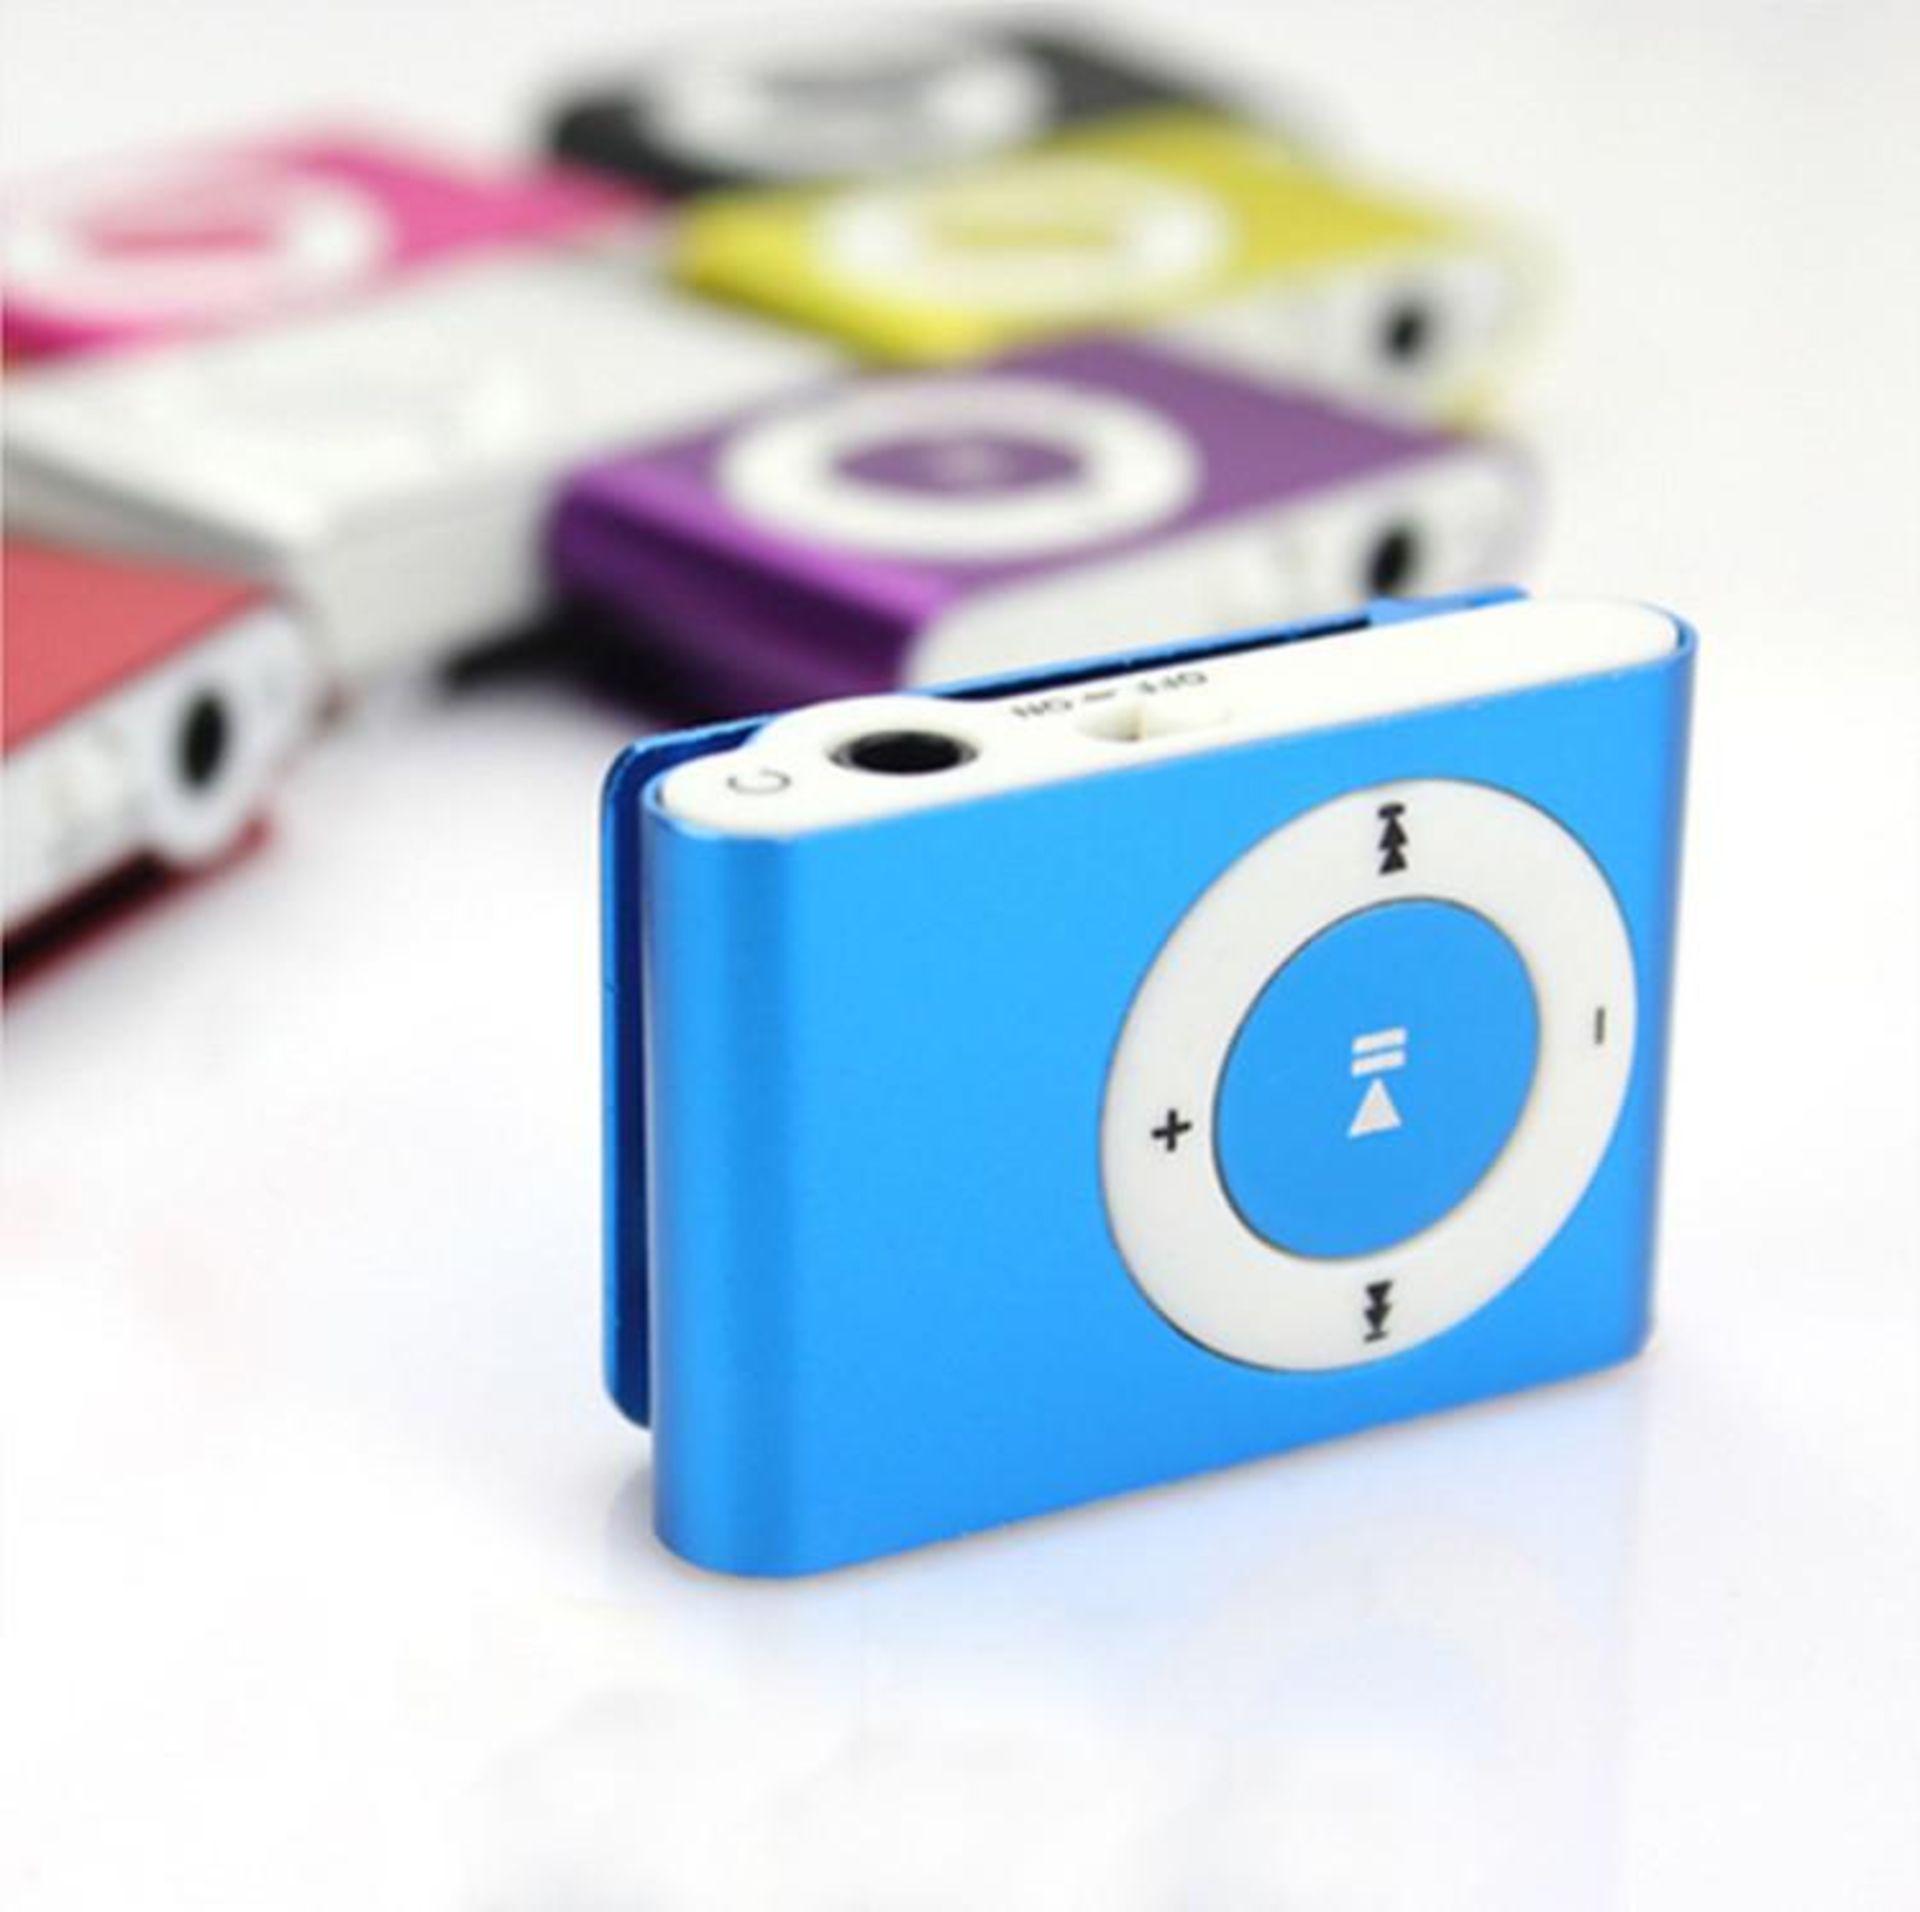 *TRADE QTY* Brand New MP3 Player With Clip And Metal Construction - With USB Cable And Earphones -